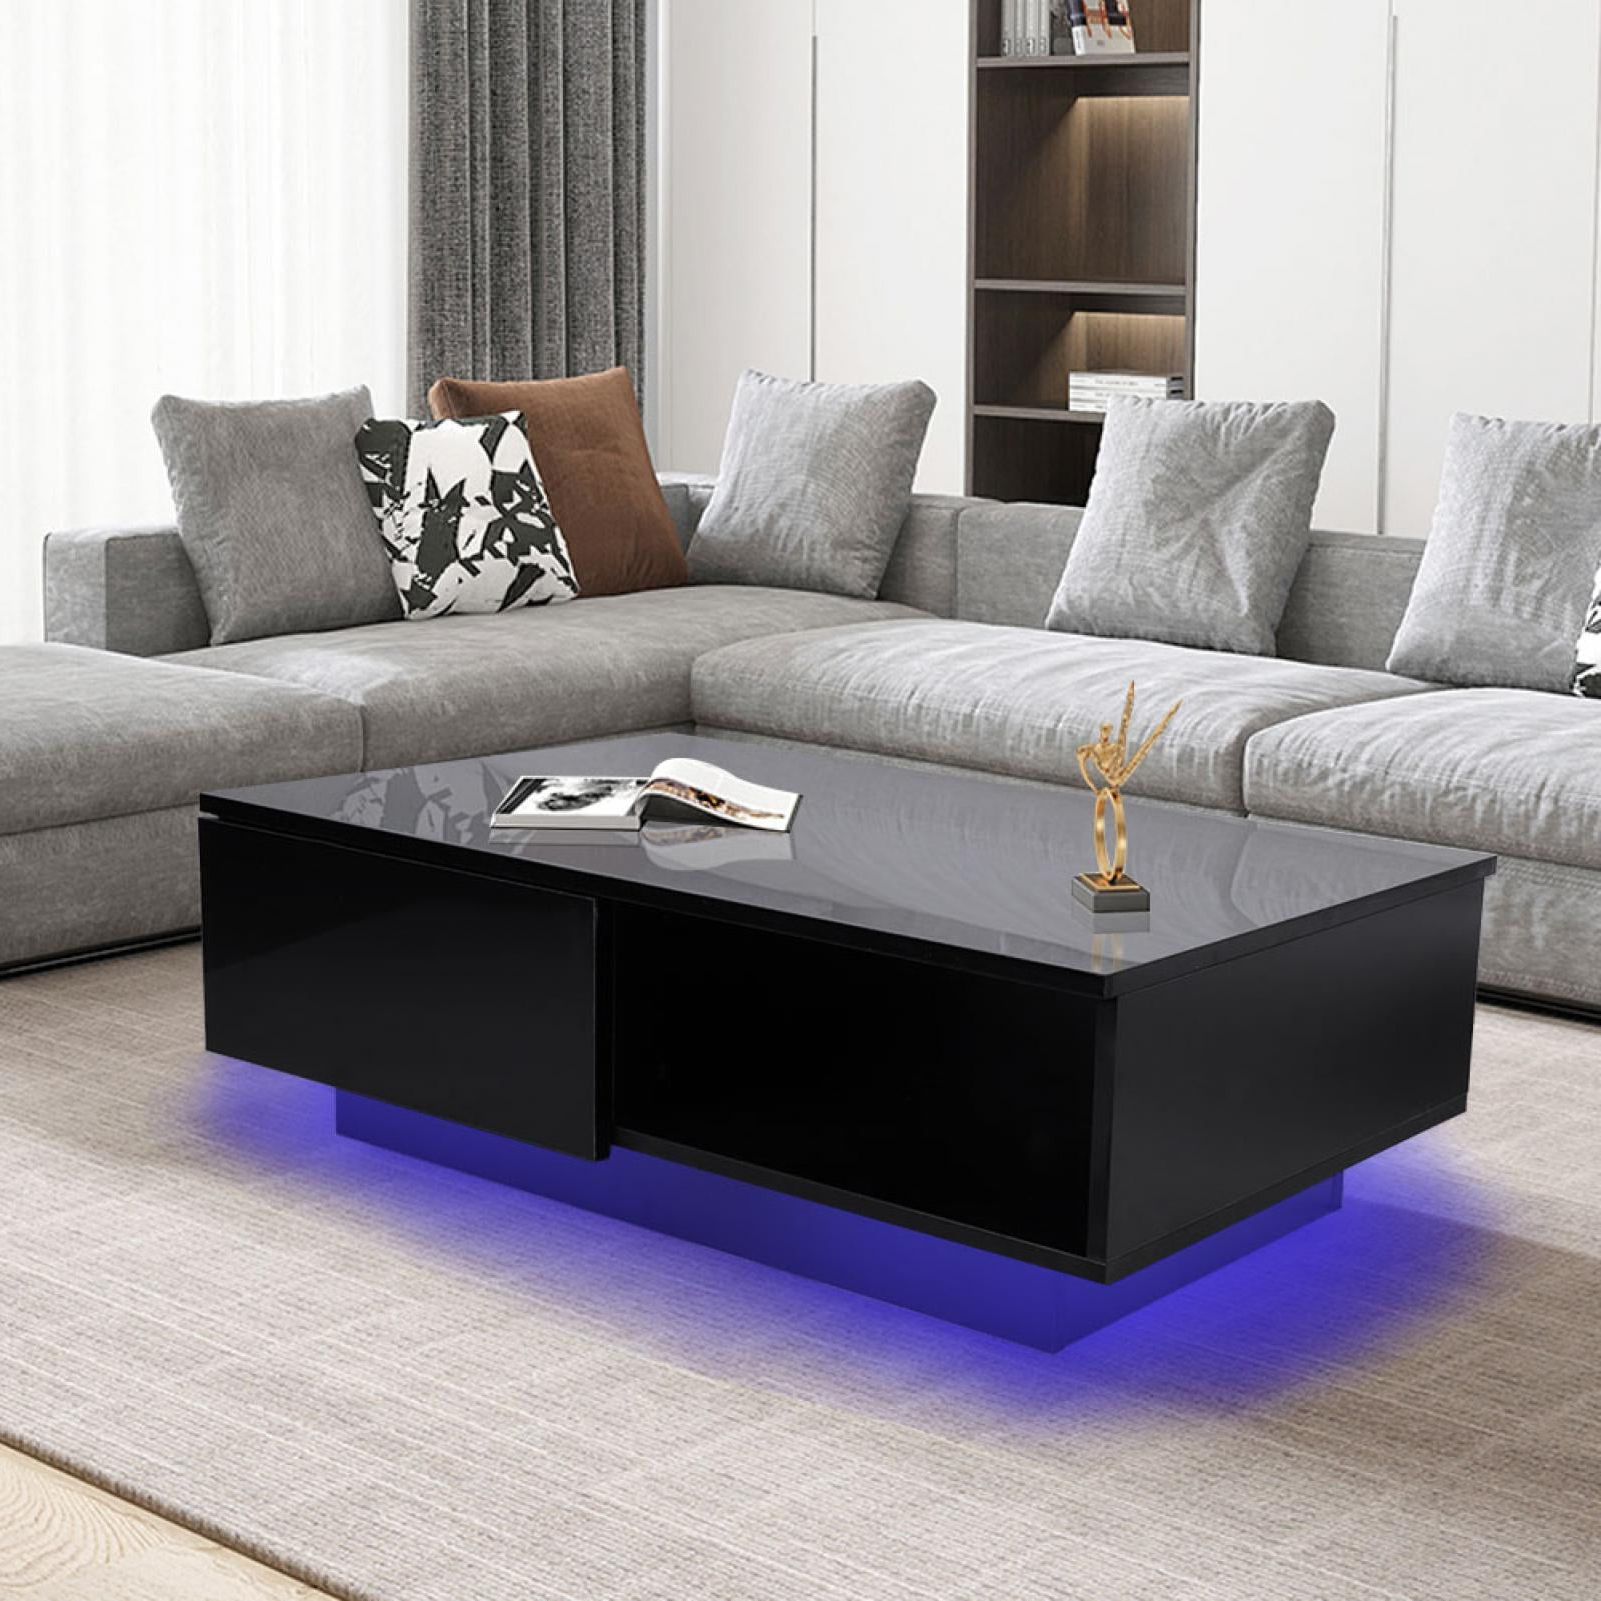 Trendy Ebtools Rectangle Led Coffee Table, Black Modern High Gloss Furniture With Coffee Tables With Drawers And Led Lights (View 3 of 15)